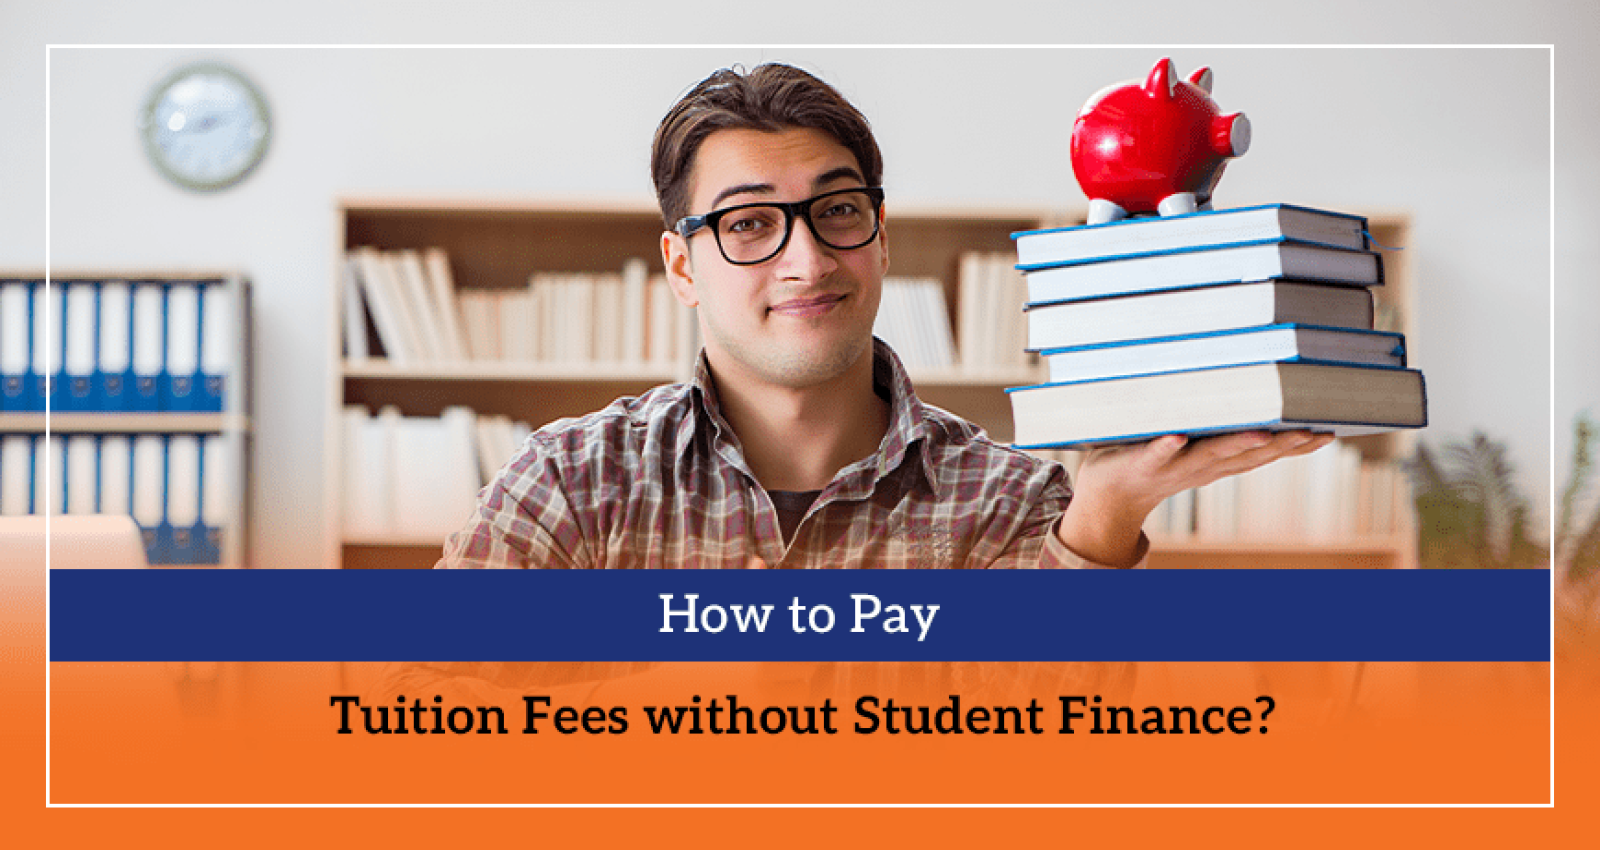 How to Pay Tuition Fees without Student Finance